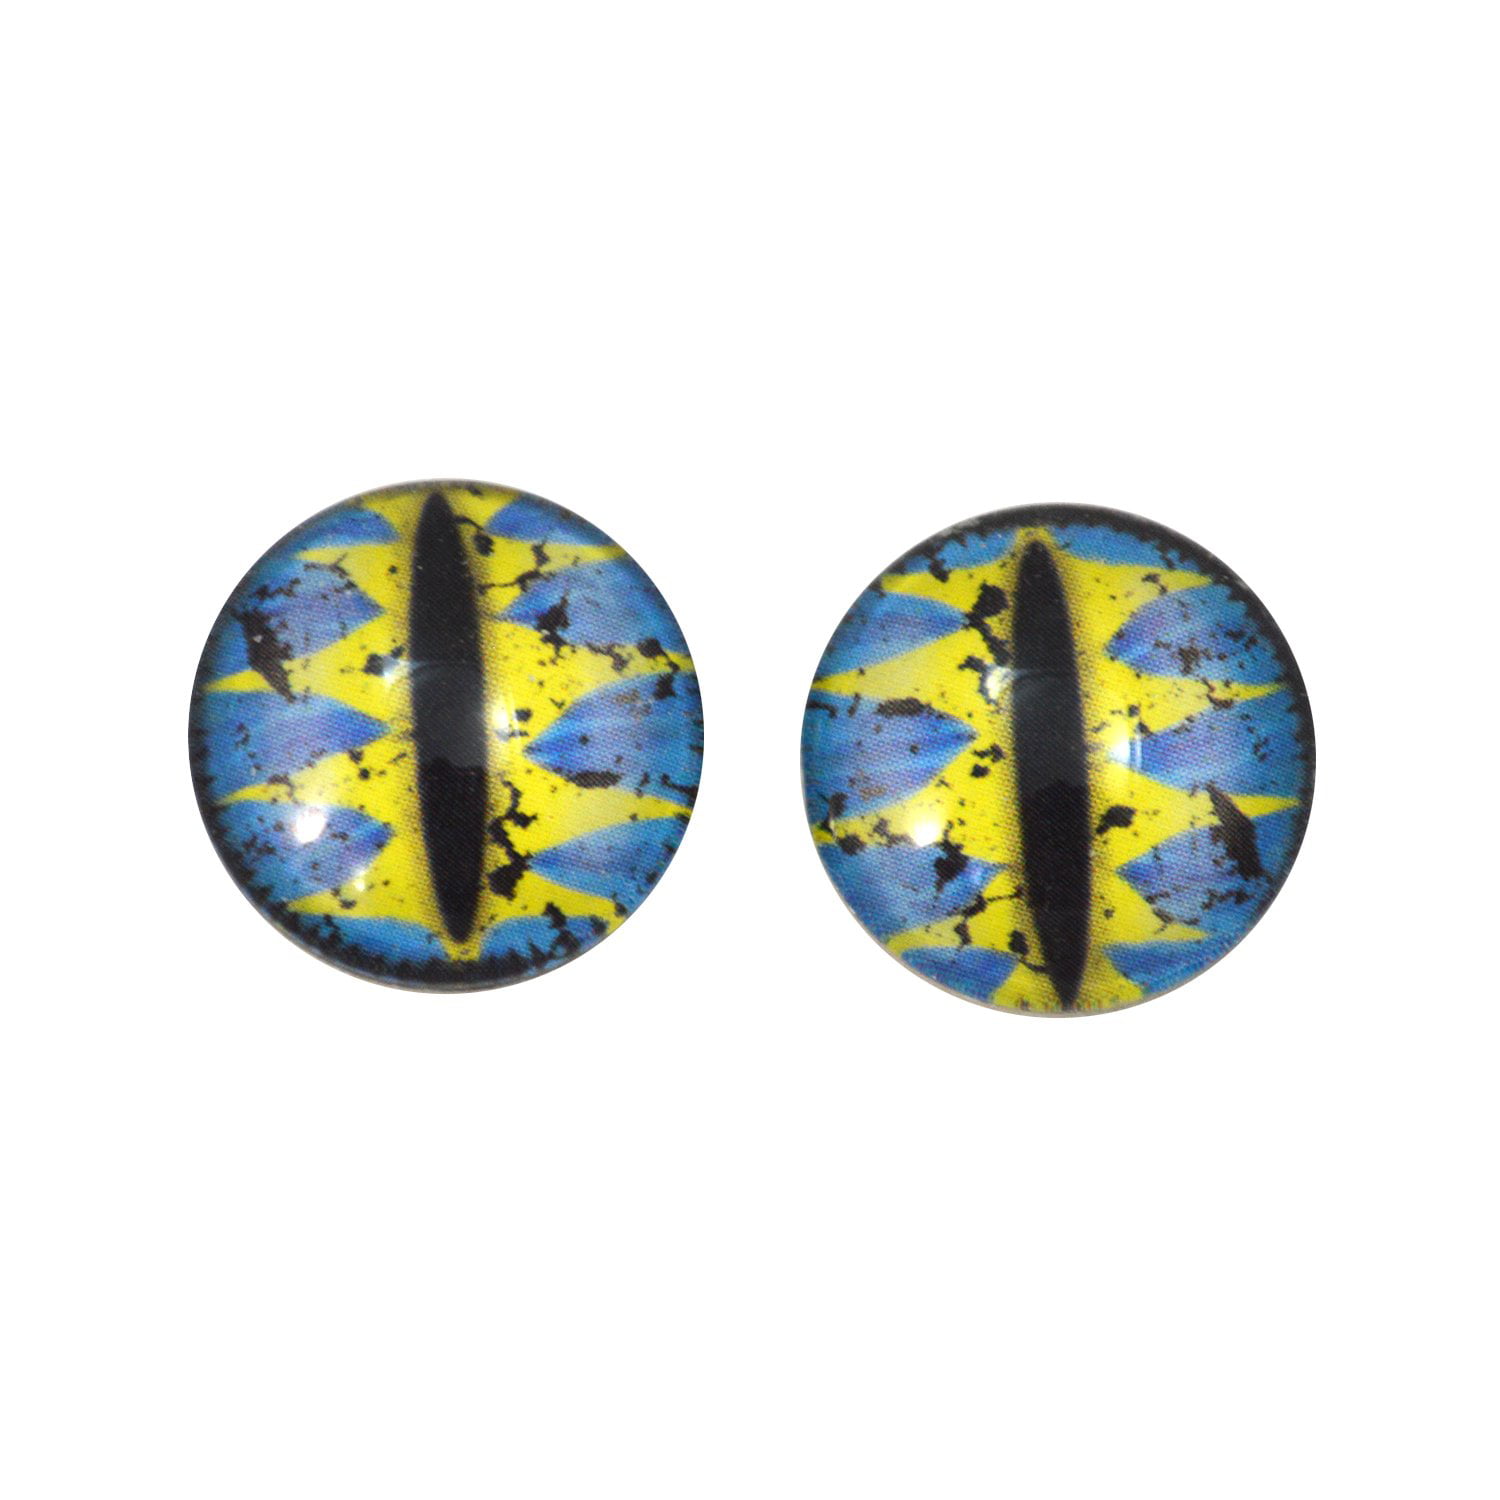 Pair of 30mm Blue and Yellow Fantasy Glass Eyes for Jewelry or Doll Making